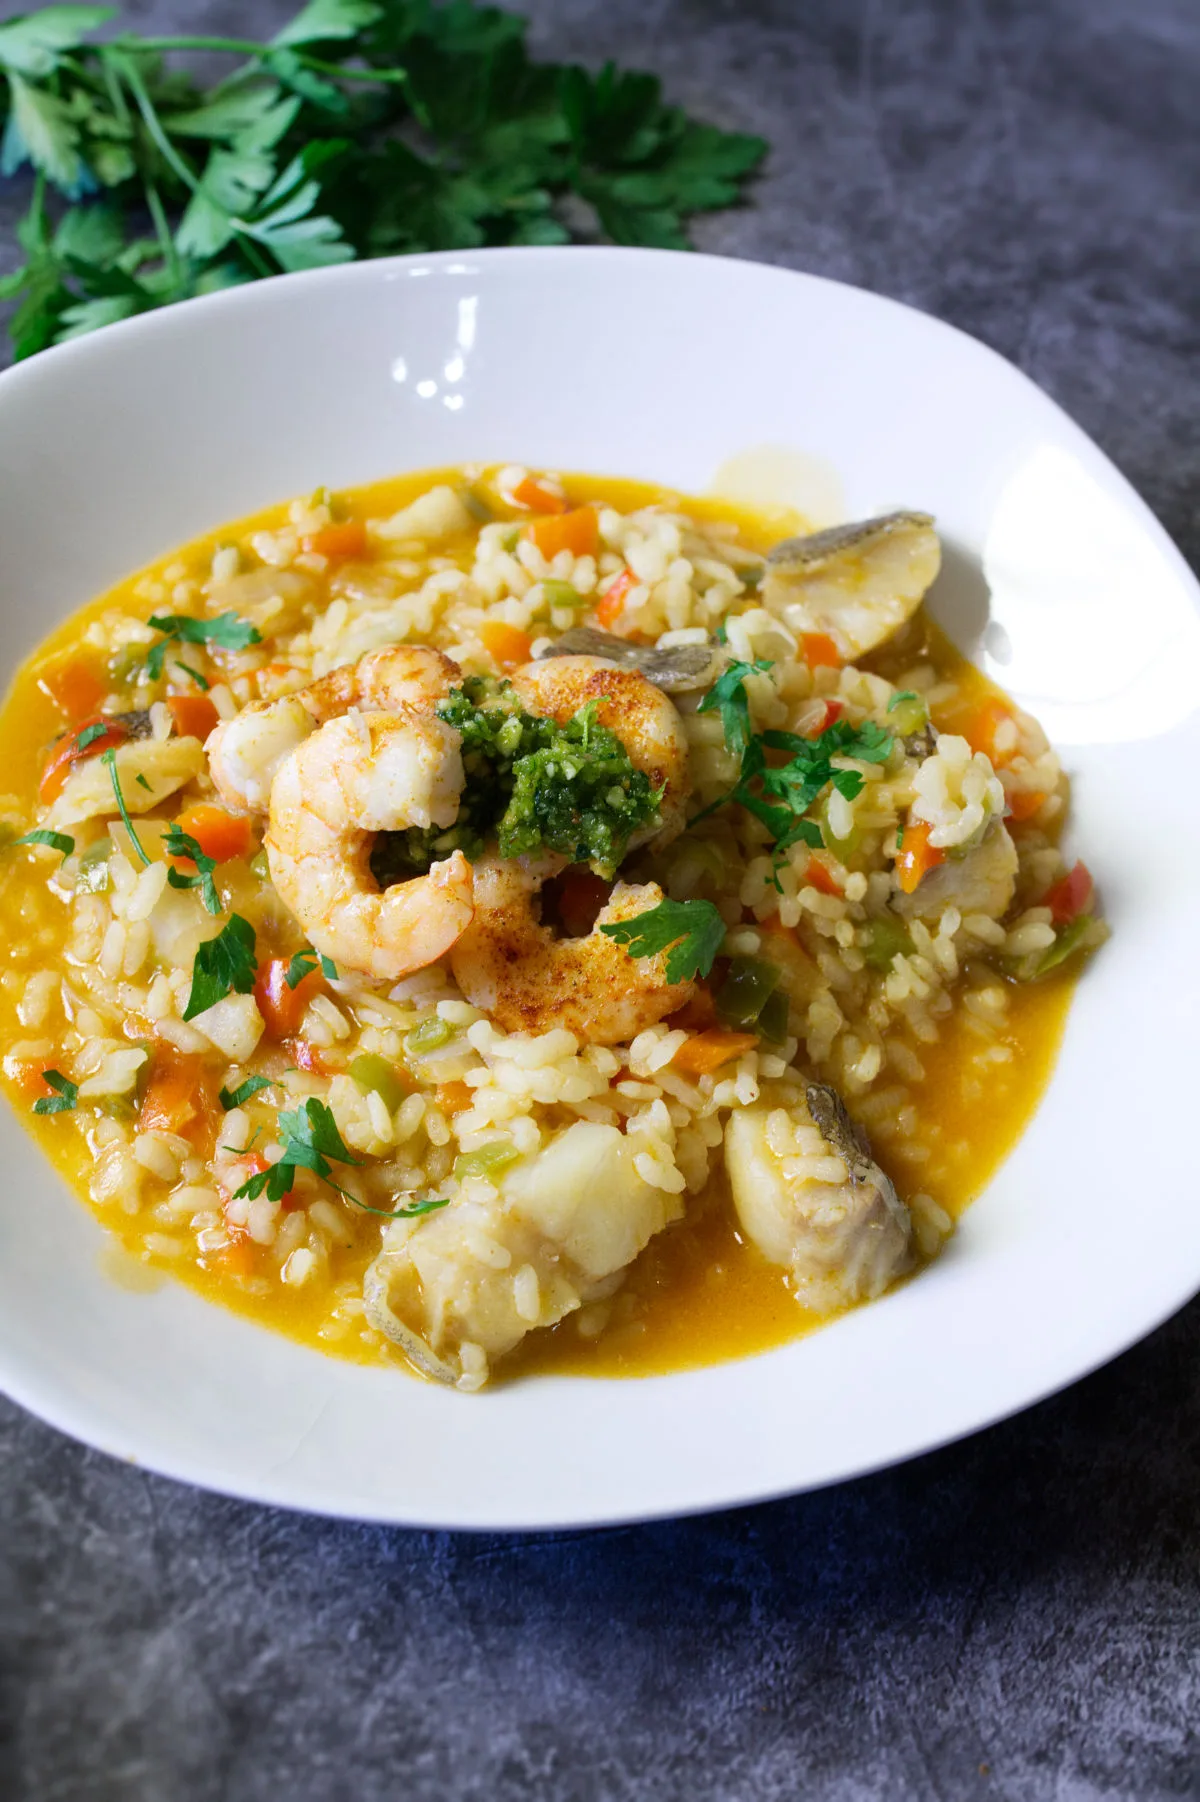 A bowl of brothy fish stew topped with some almond pesto and pan-fried shrimp.